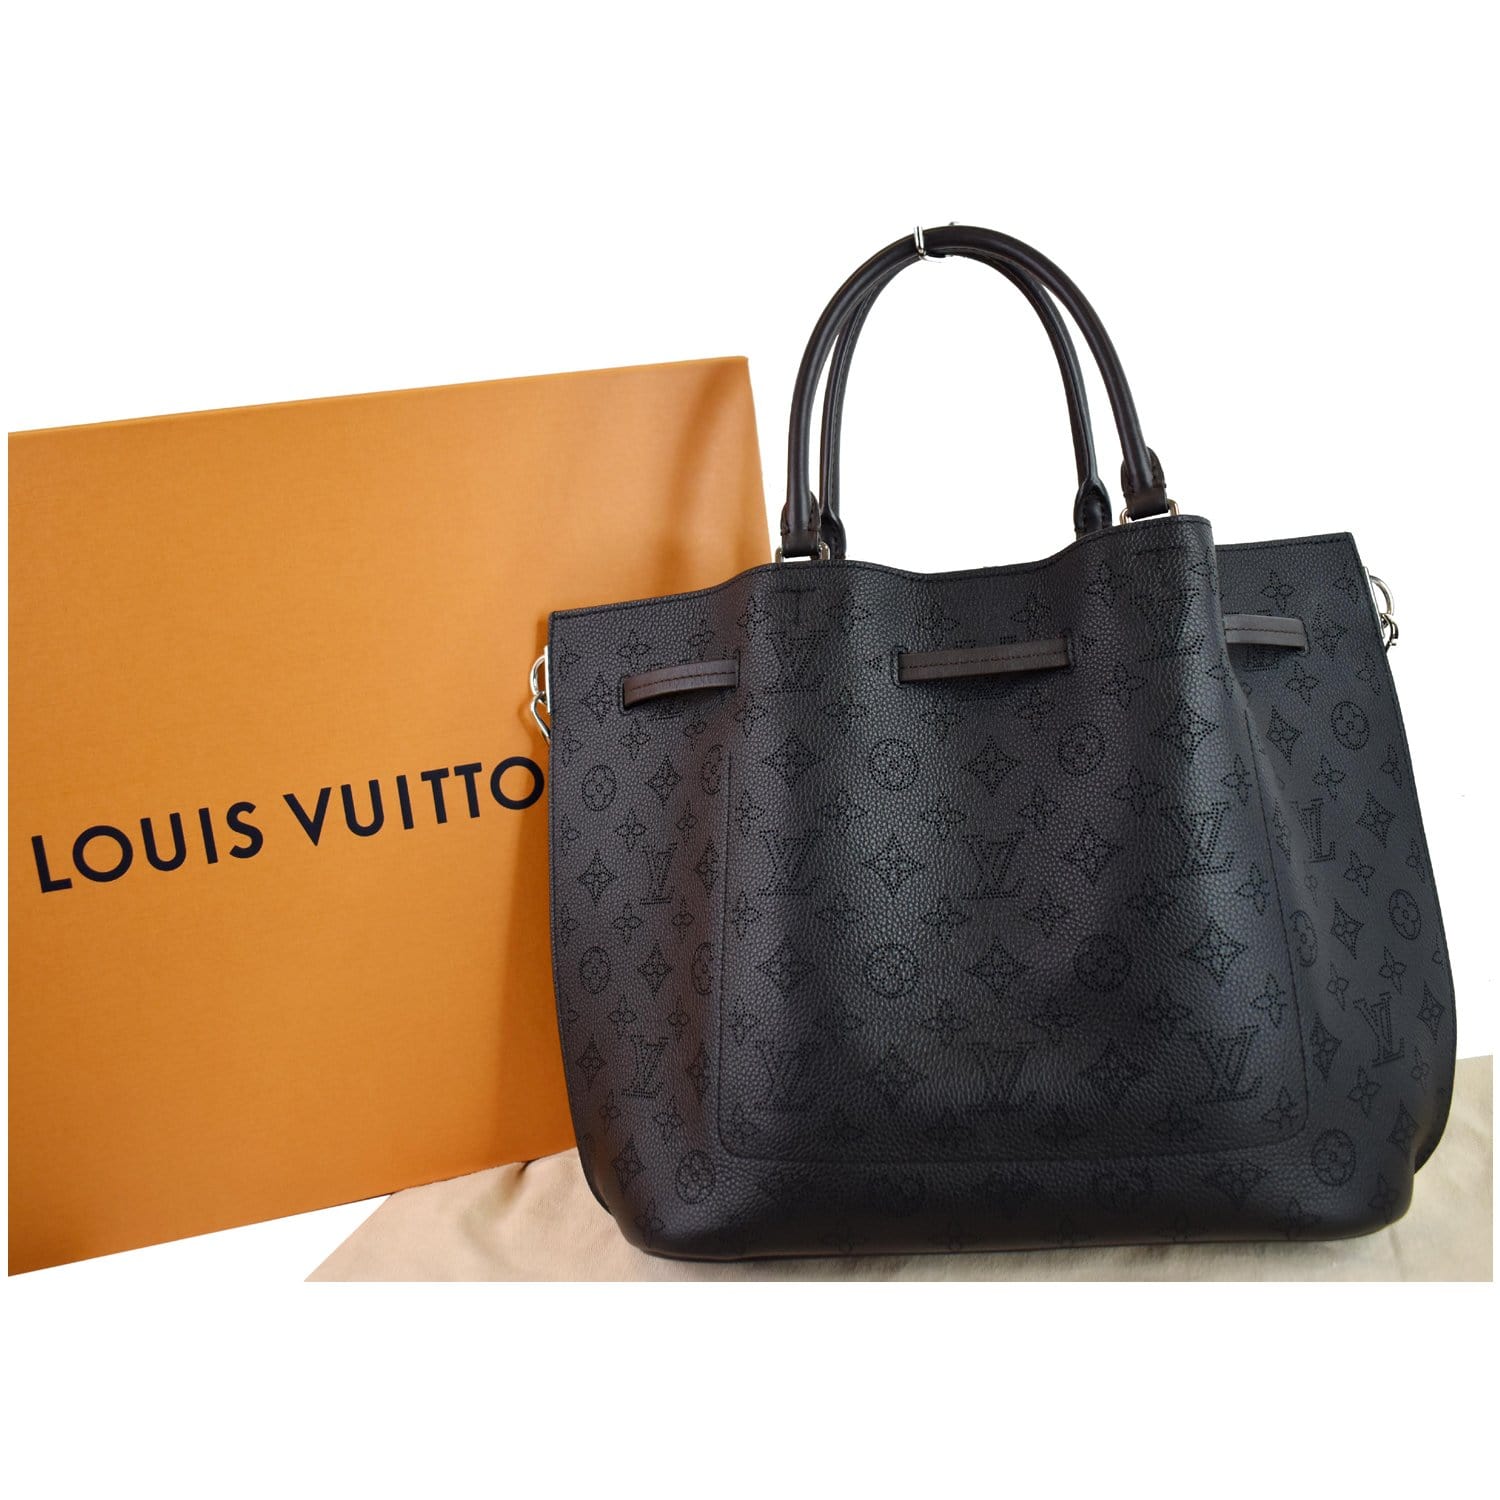 Louis Vuitton Mahina Girolata EXCLNT COND with Box/Bag Wallet SEPARATE  Listing